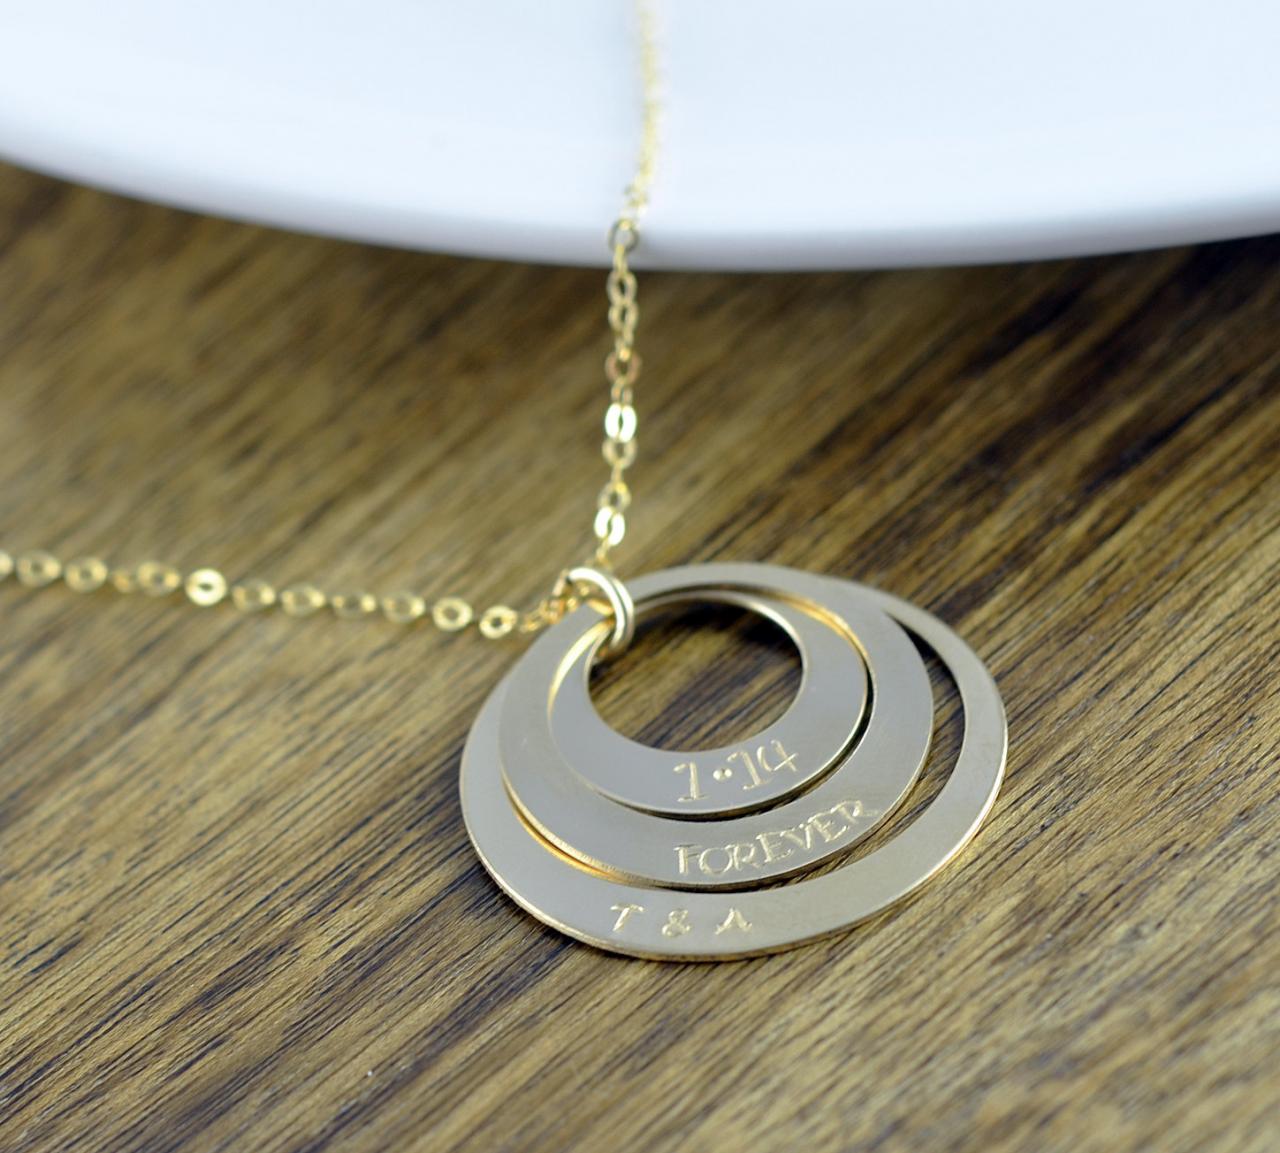 Gold Washer Necklace, Washer Jewelry, Washer Pendant, Triple Washer Necklace, Gold Necklace, Gold Jewelry, Gift For Her, Gift For Wife